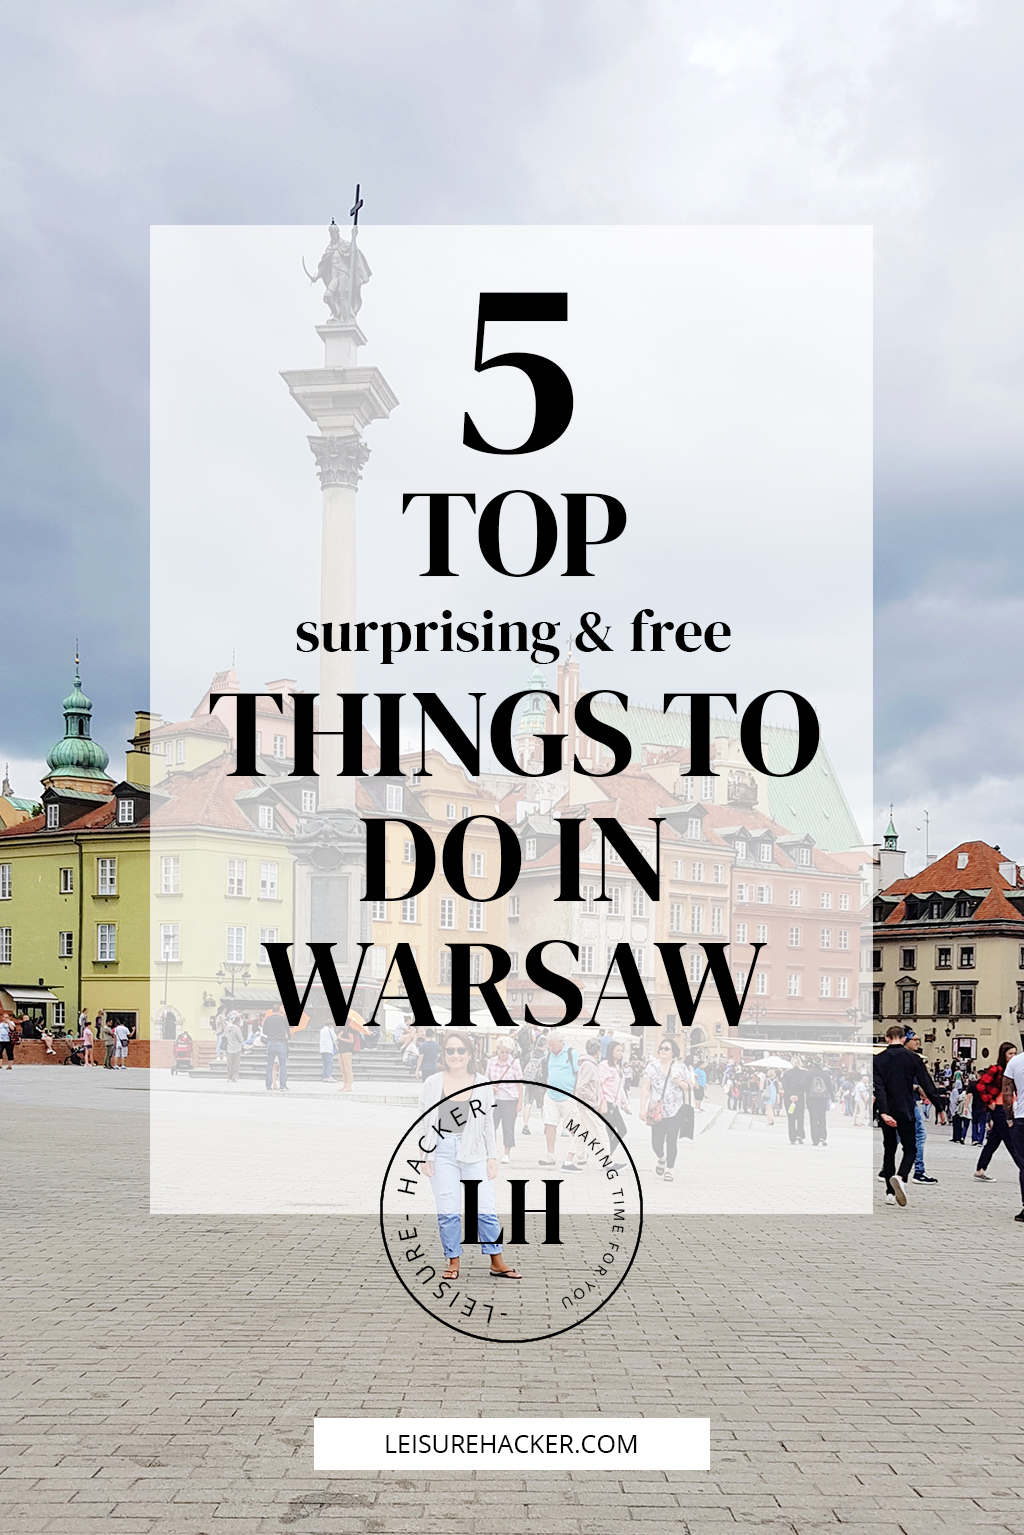 5 top surprising (free) things to do in Warsaw